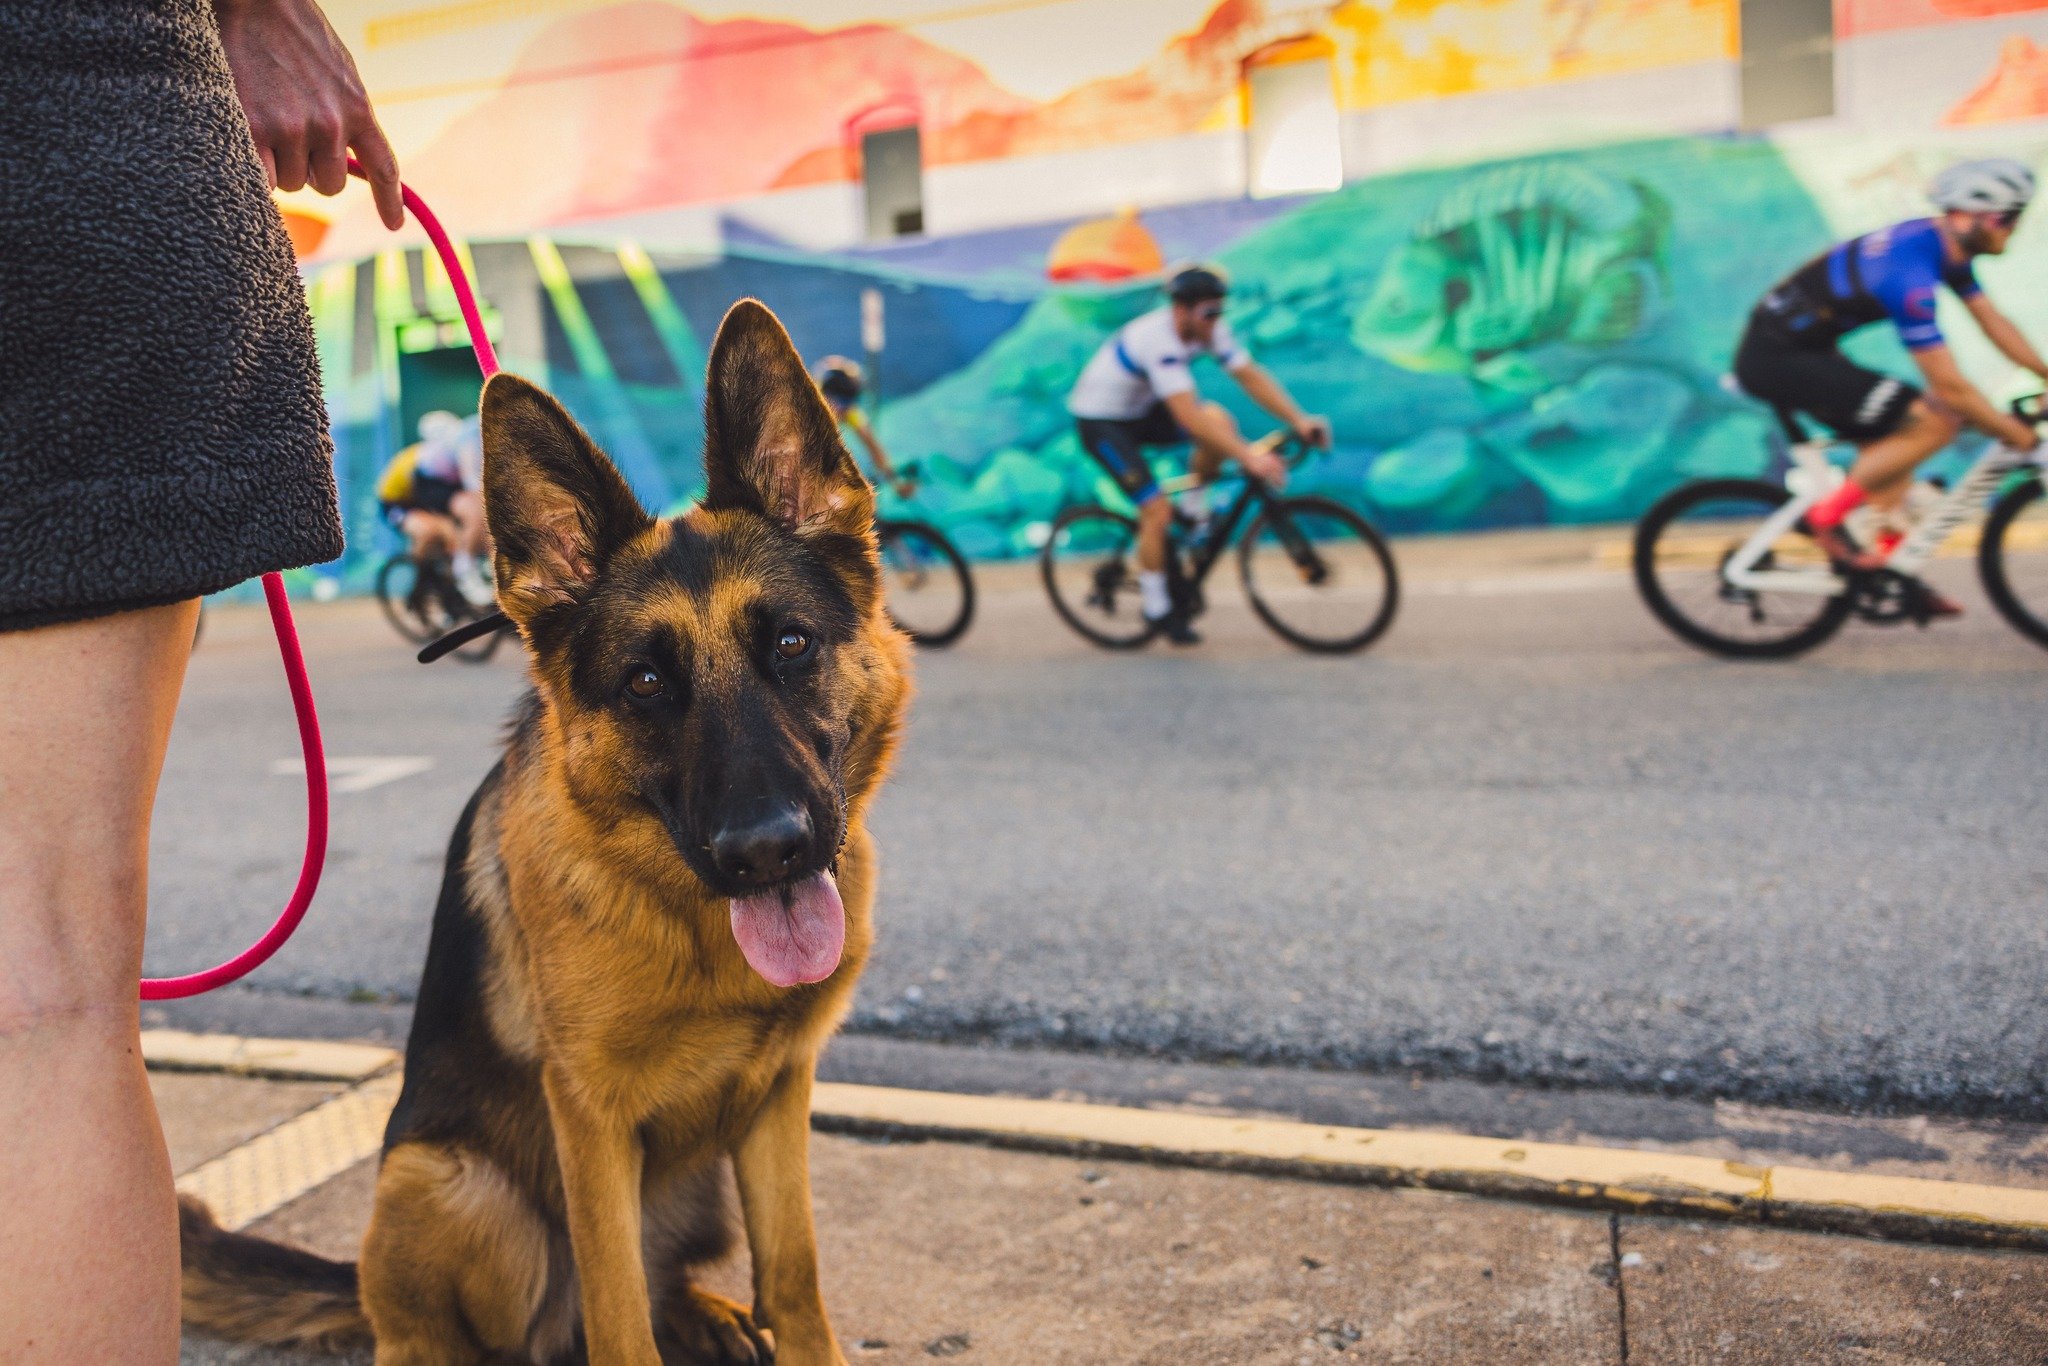 Ready for Round Two? 
Join us for the thrill of the Natural State Criterium Series in downtown Springdale on May 15! 🚴 Grab some dinner in our Outdoor Dining District and cheer on the racers. Furry friends are always welcome! 😉🐾 

🚴 May 15 starti